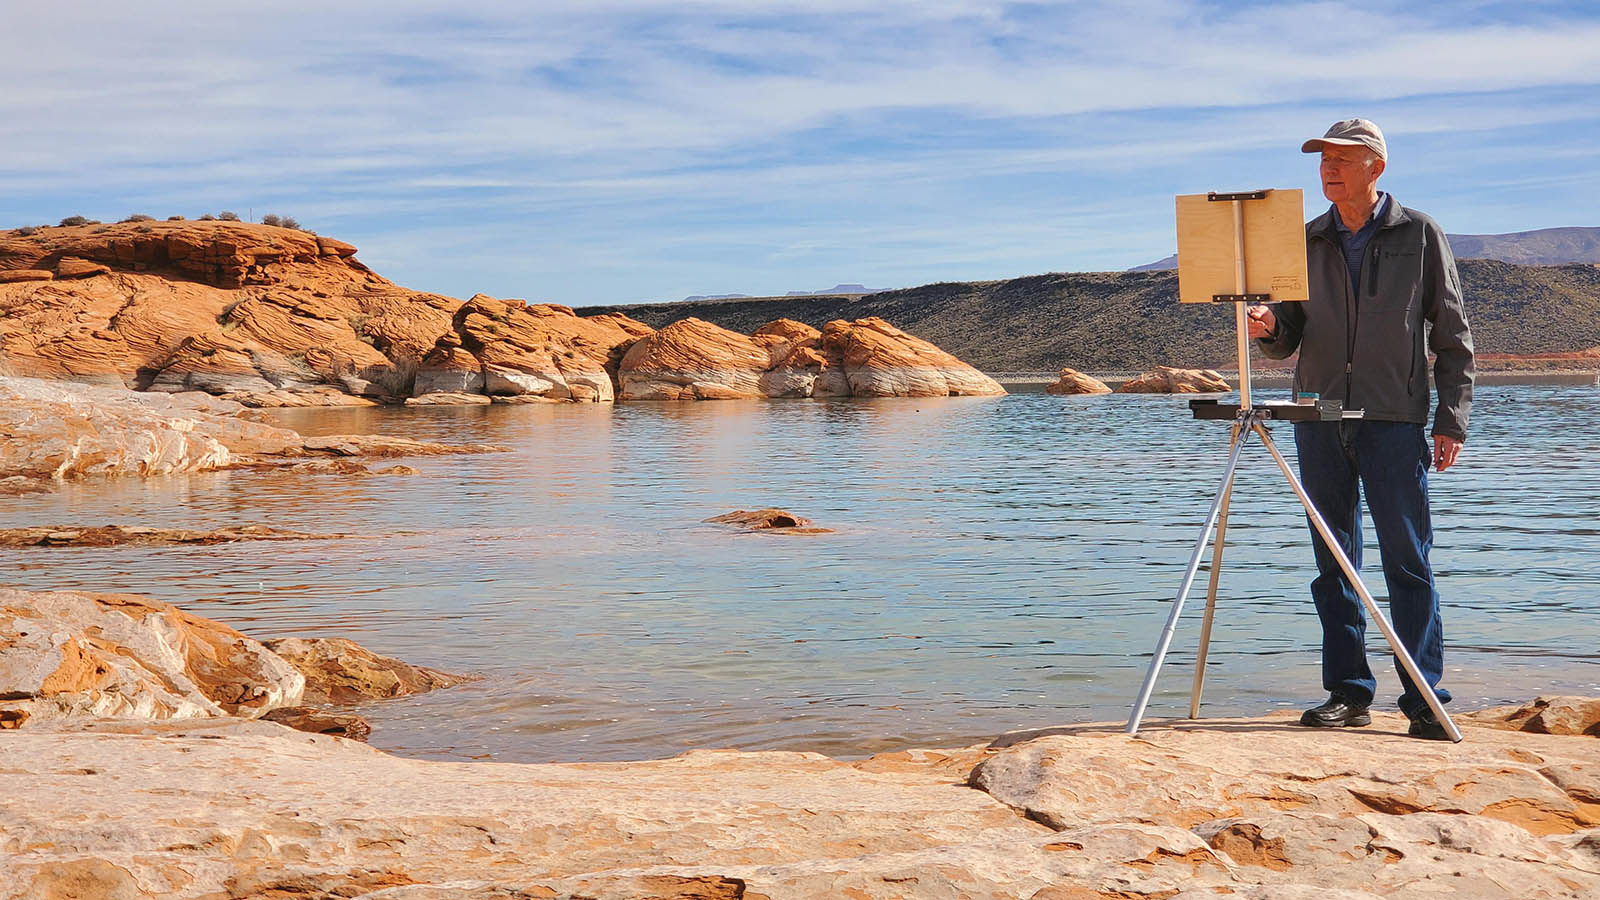 Soltek Easel on location with plein air artist and inventor Jim Wilcox at Sand Hollow Resort